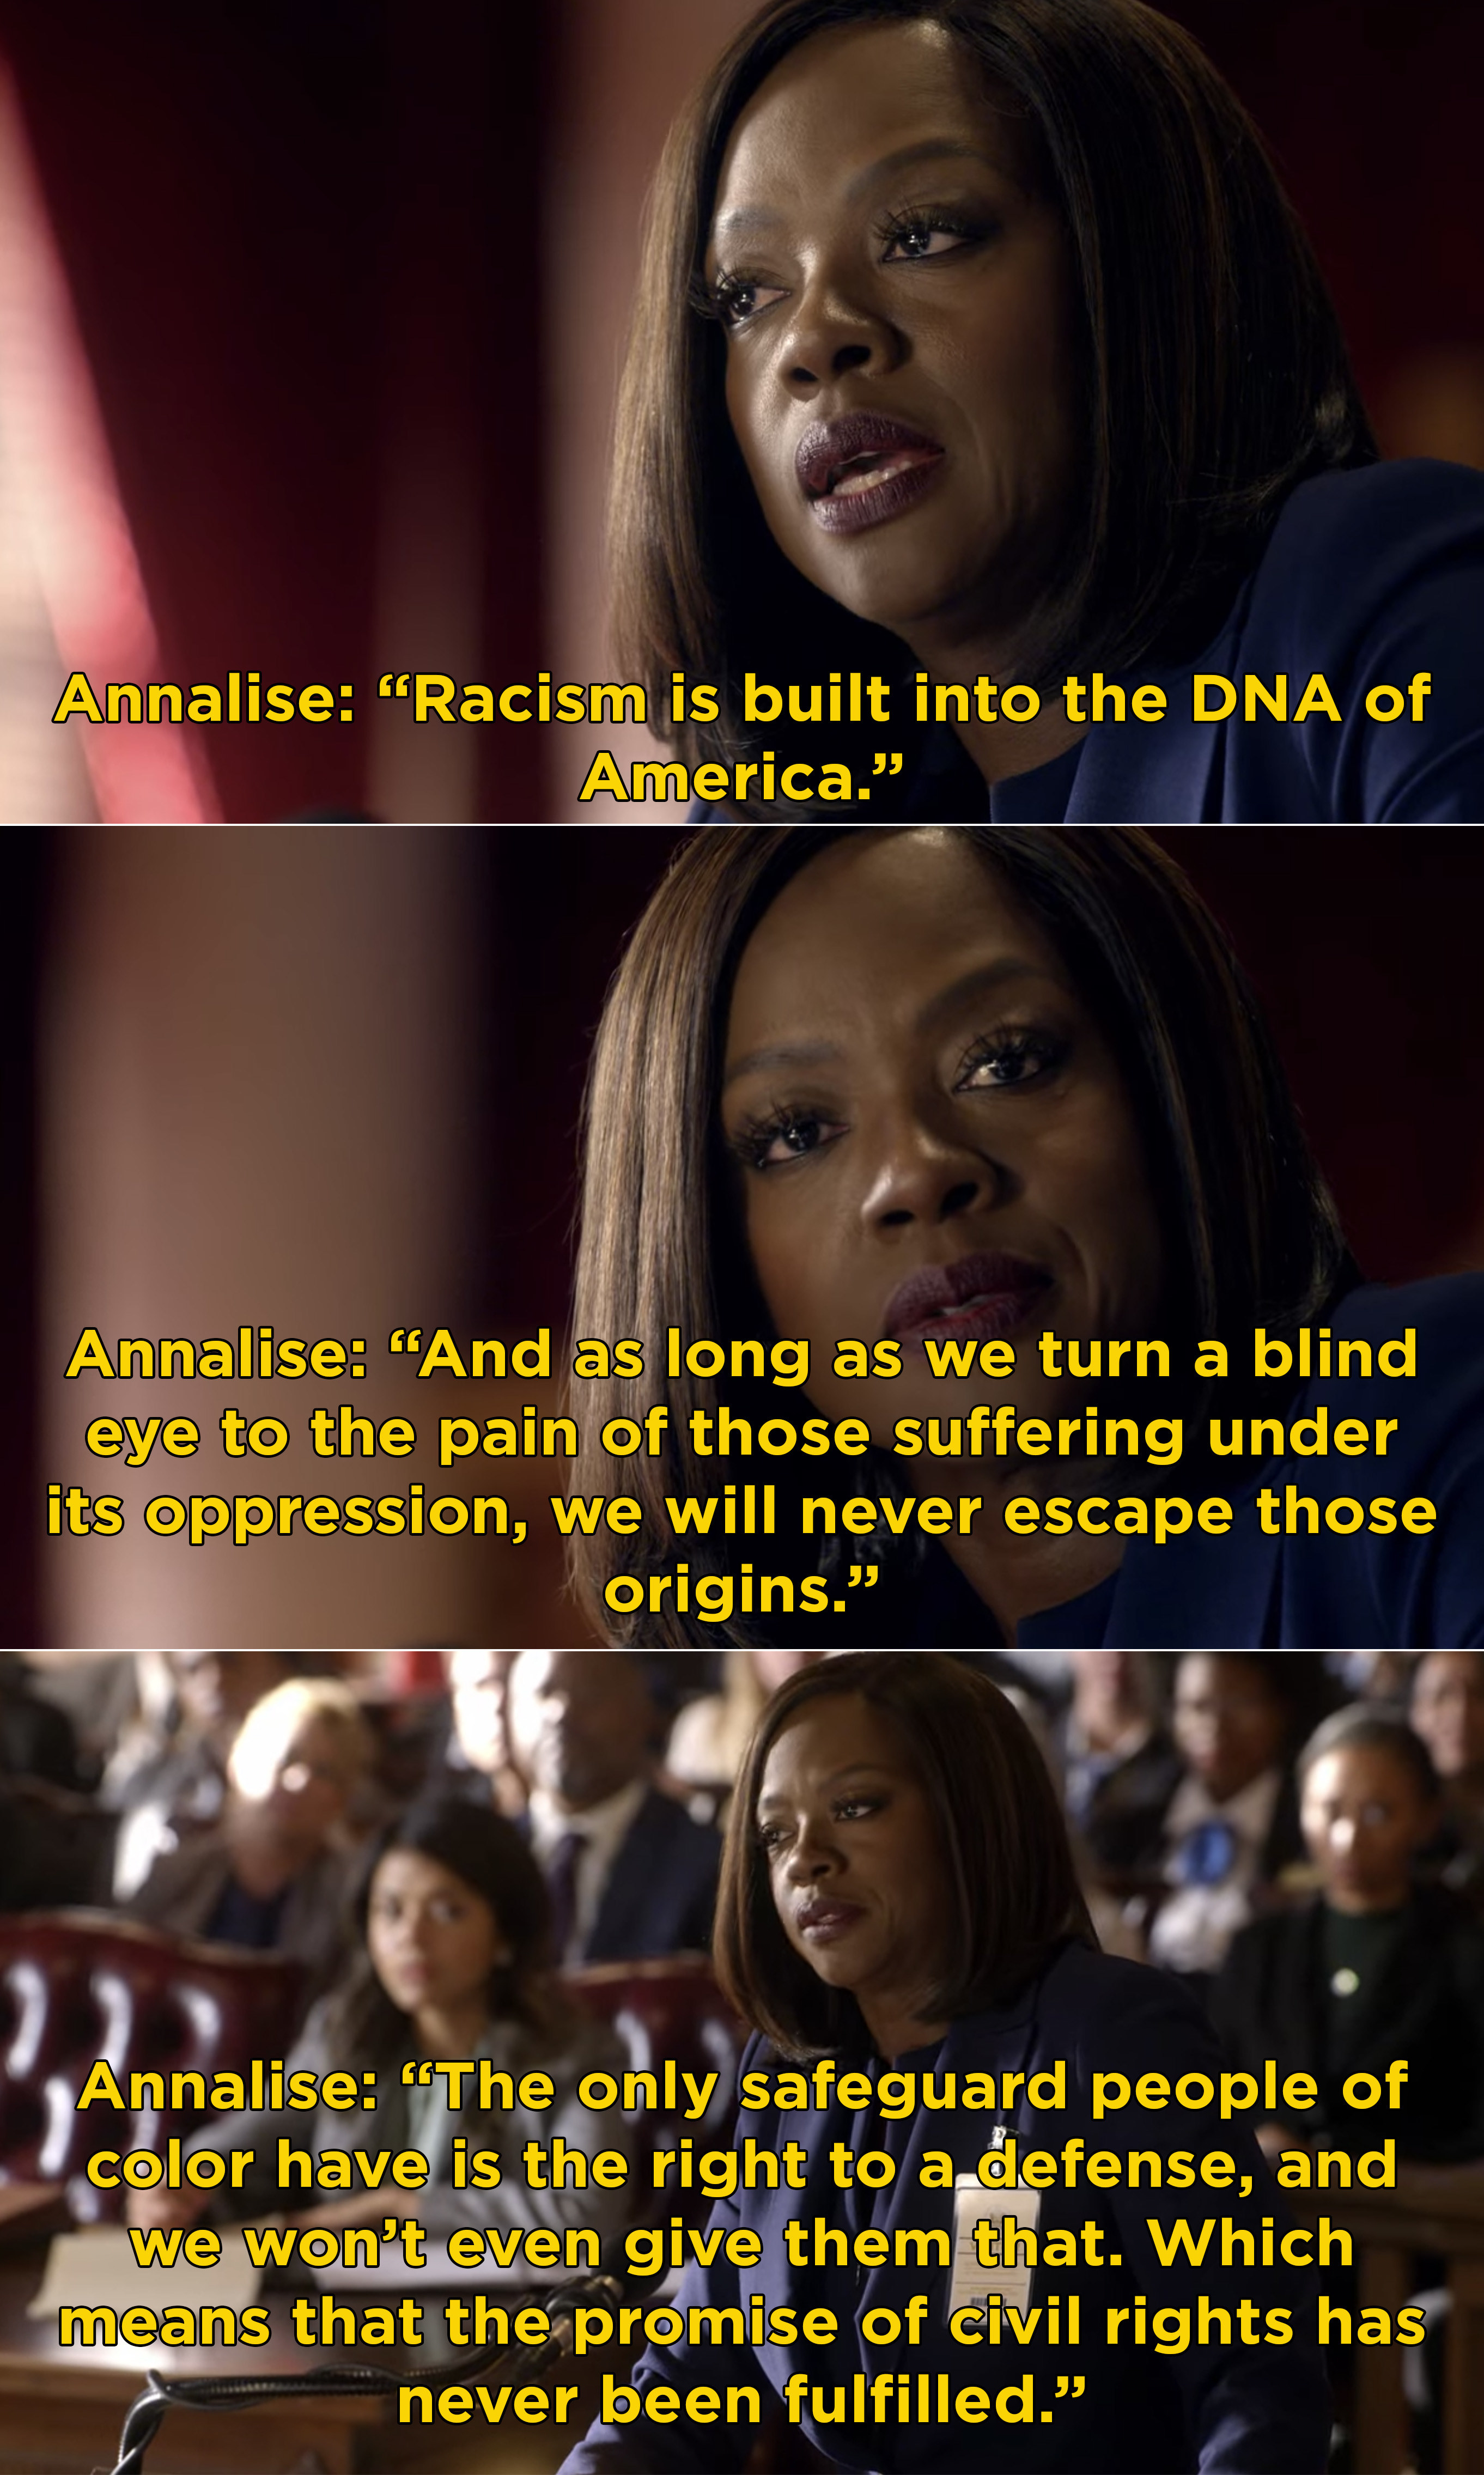 Annalise saying that &quot;Racism is built into the DNA of America&quot; and we have to change it